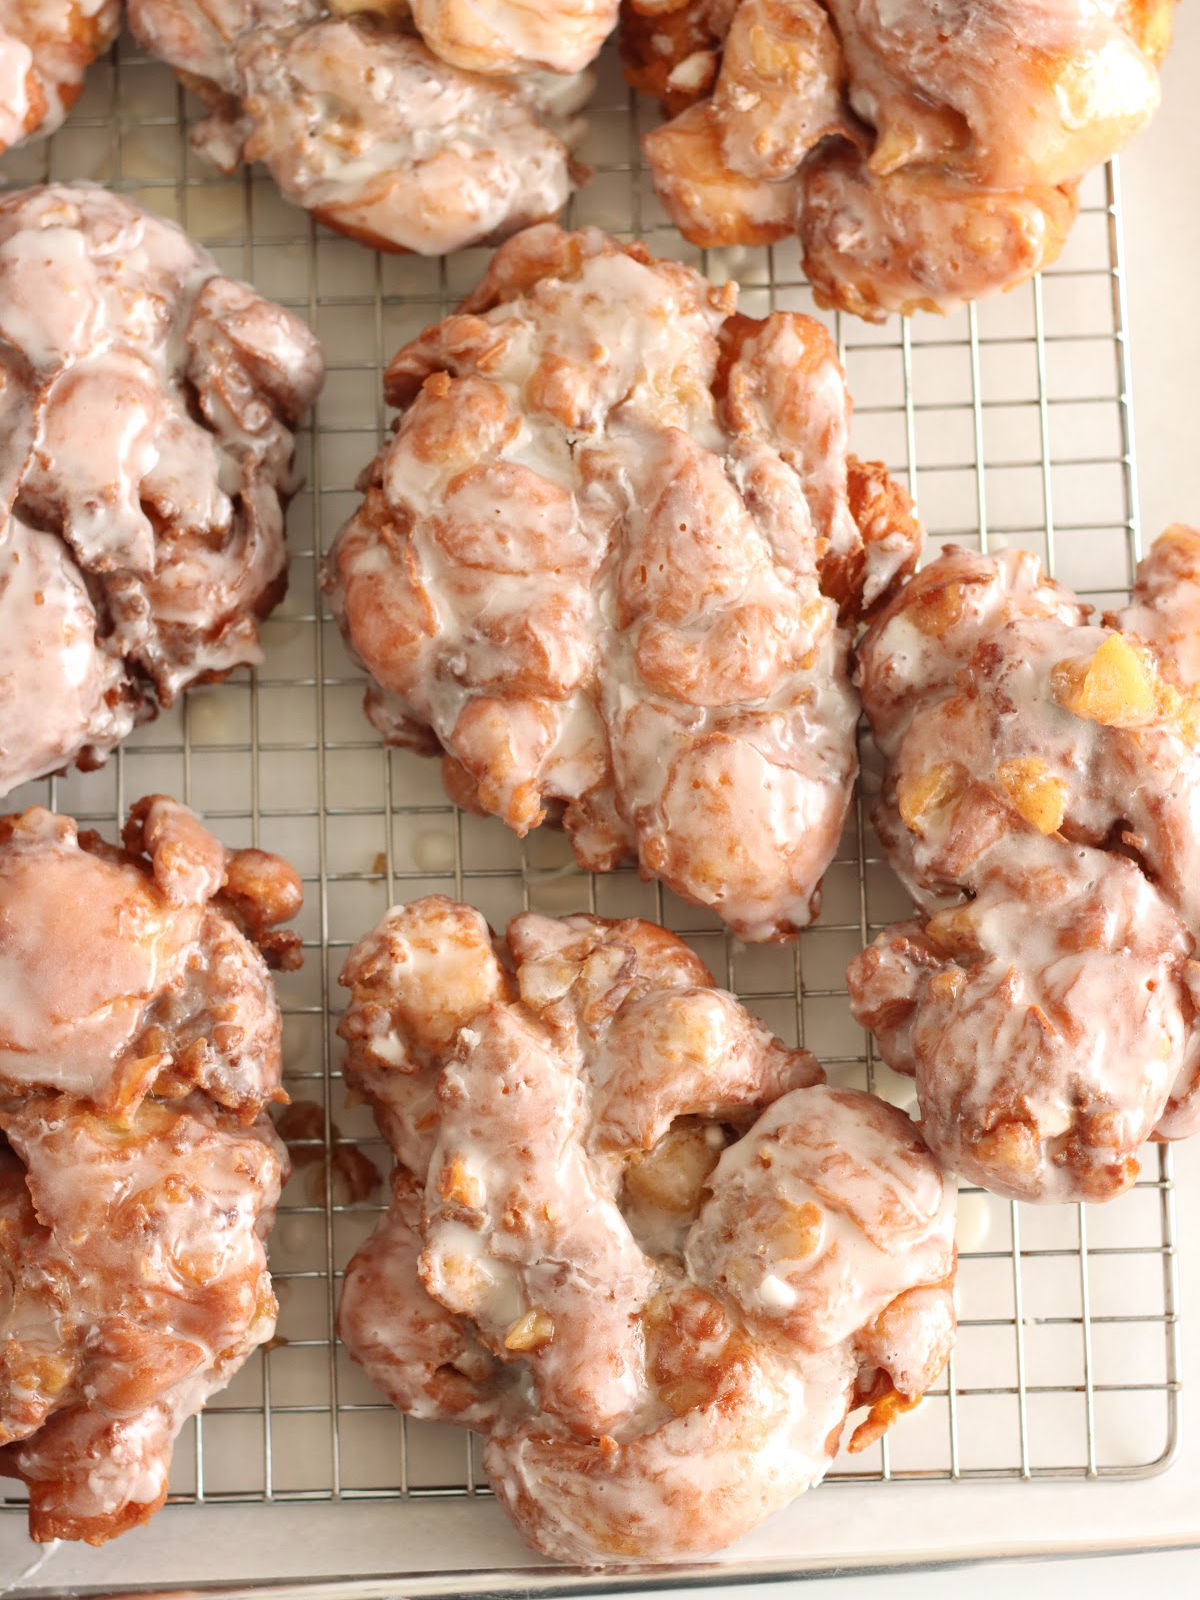 Apple fritters with icing drying on metal baking rack.